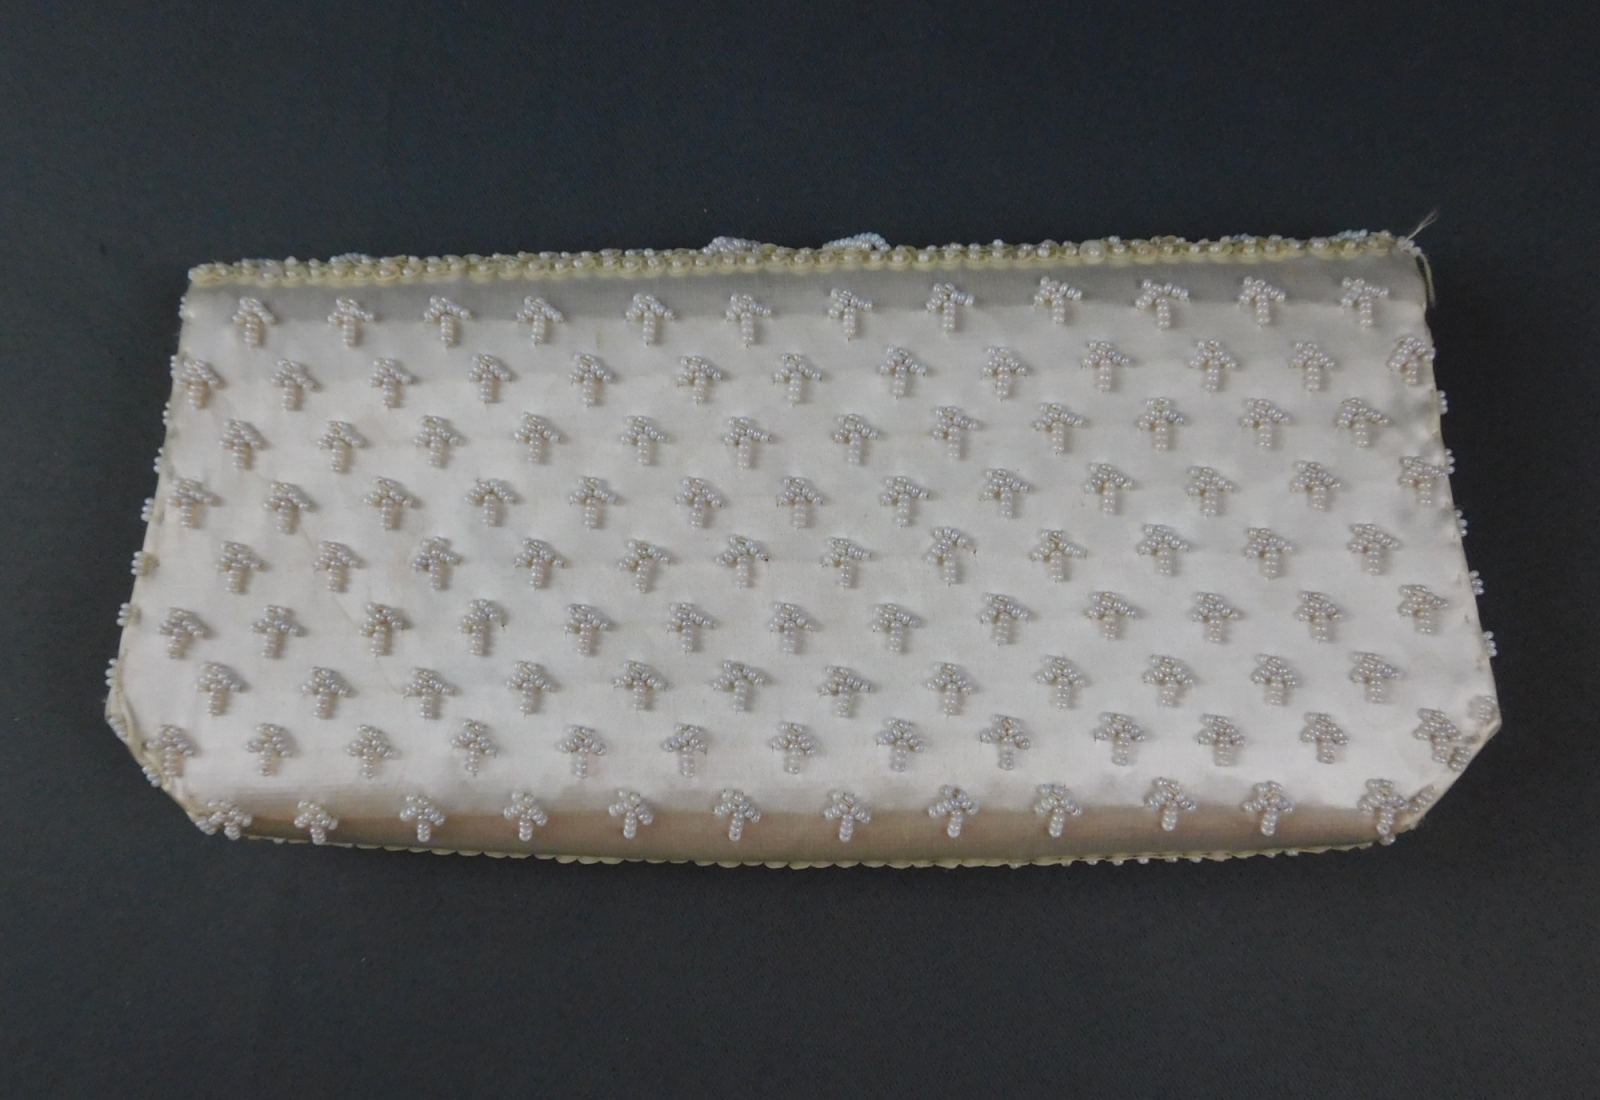 Vintage Hand Beaded in Belgium White/Ivory Clutch Evening Bag Kiss